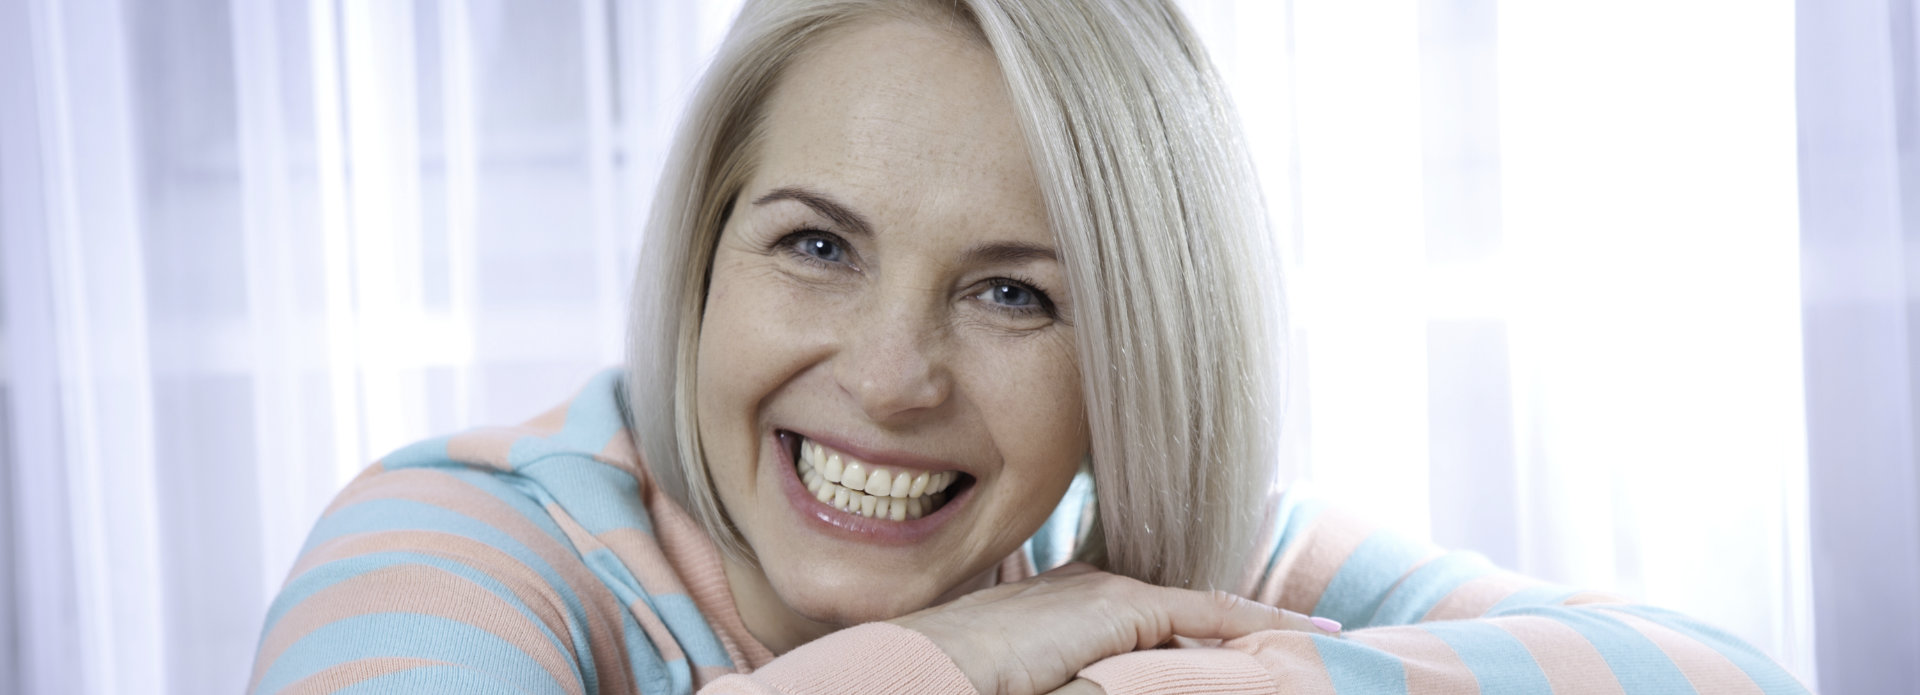 happy middle-aged woman showing her beautiful teeth in a smile after dental restorative treatment